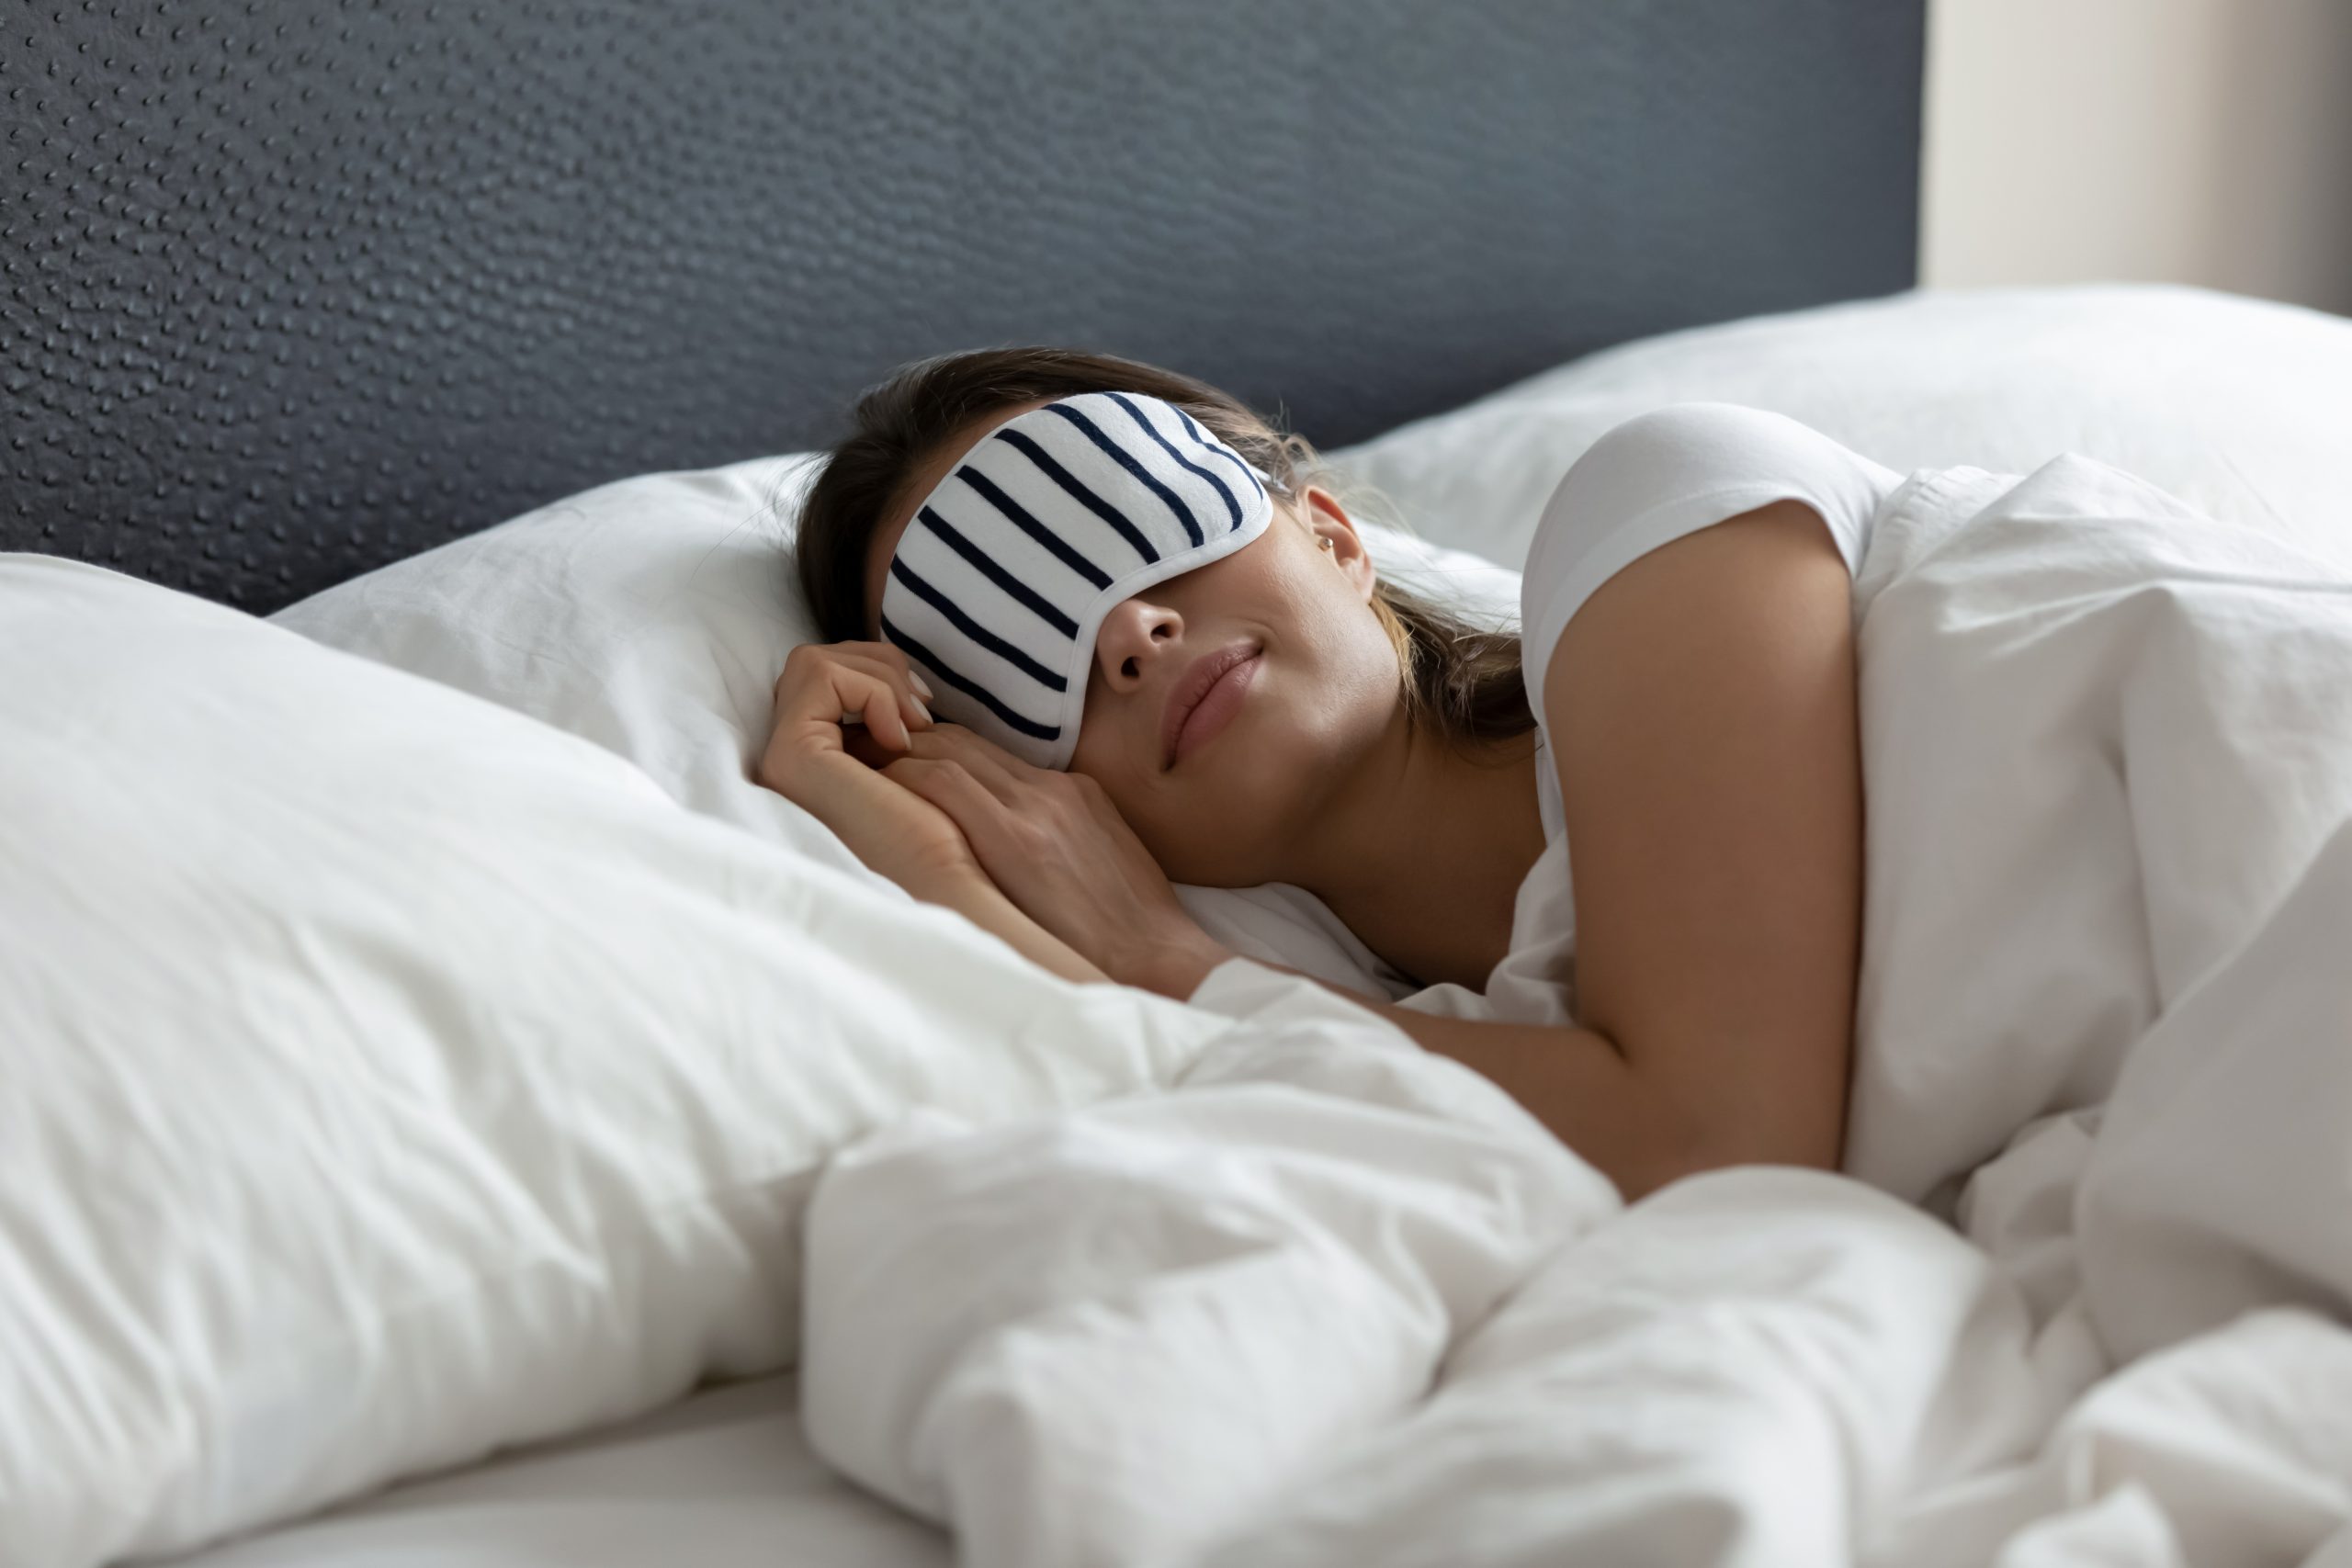 The connection between hearing health and sleep quality